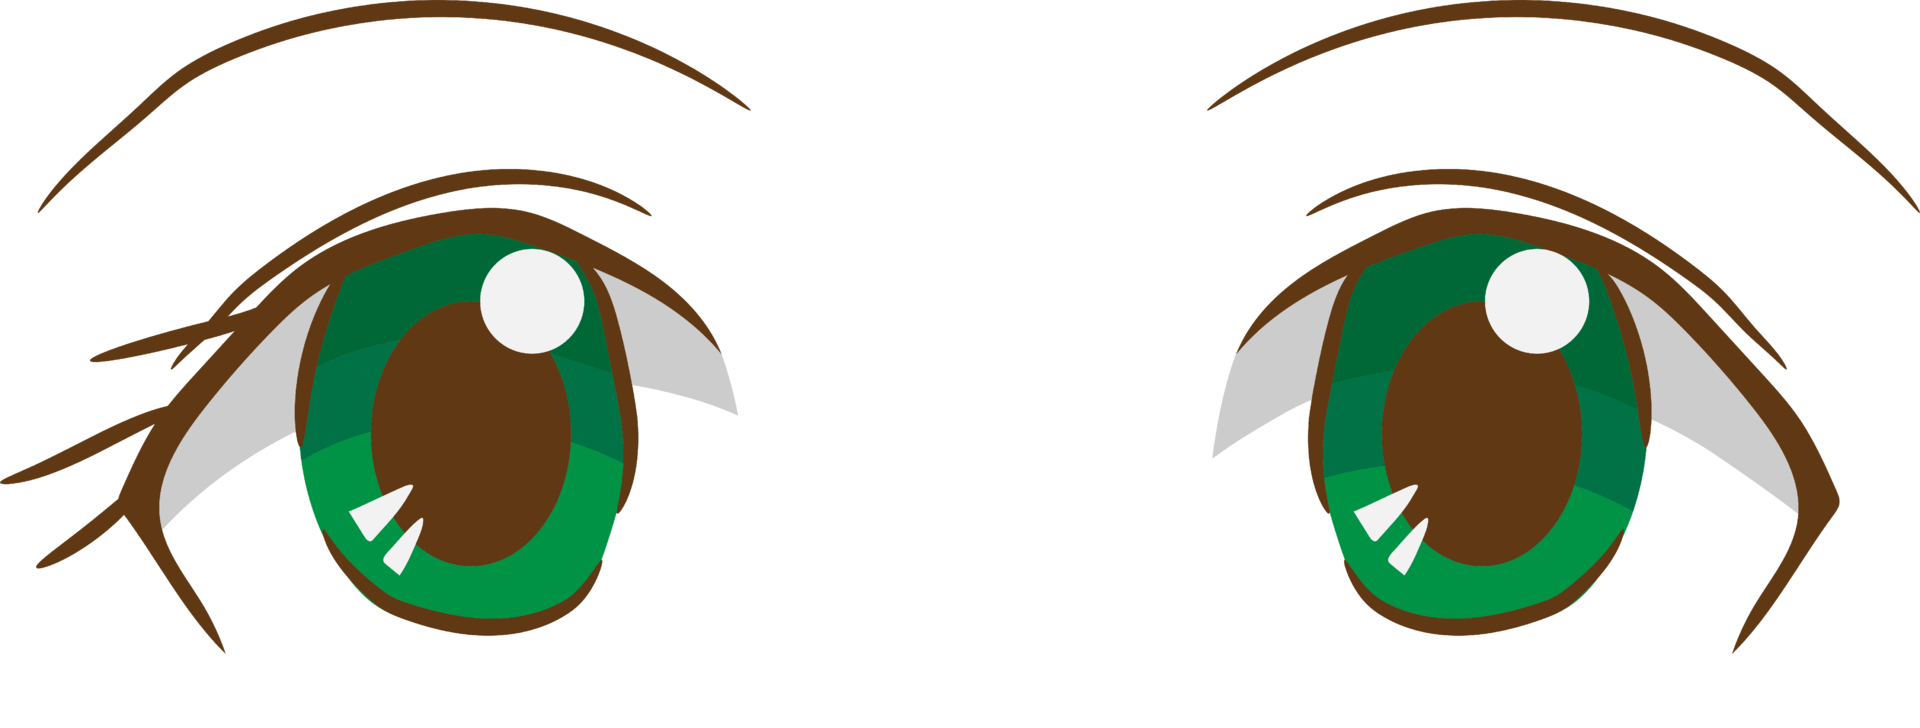 Cute Cartoon Character PNG Picture, Cartoon Anime Characters Cute Green Eyes,  Anime, Character, Eye PNG Image For Free Download